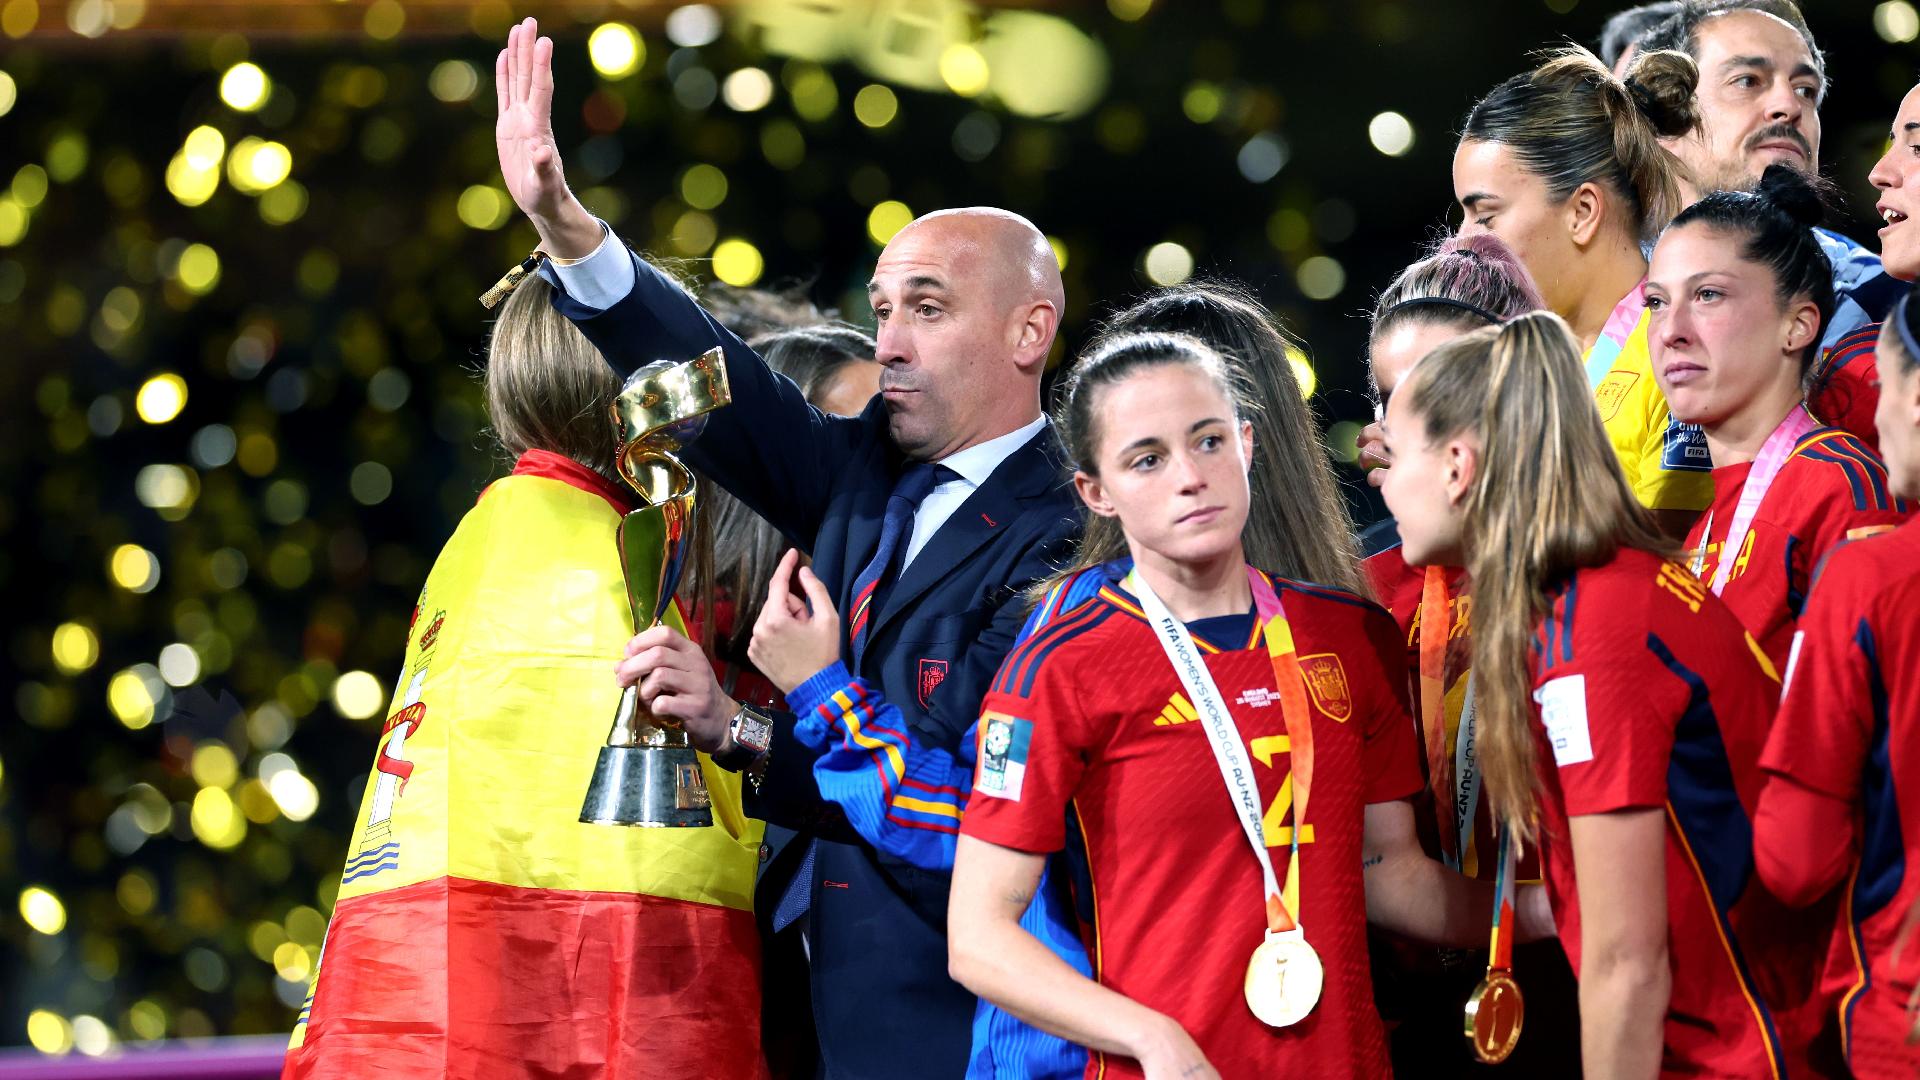 Luis Rubiales’ three-year ban for his conduct at Women’s World Cup final upheld